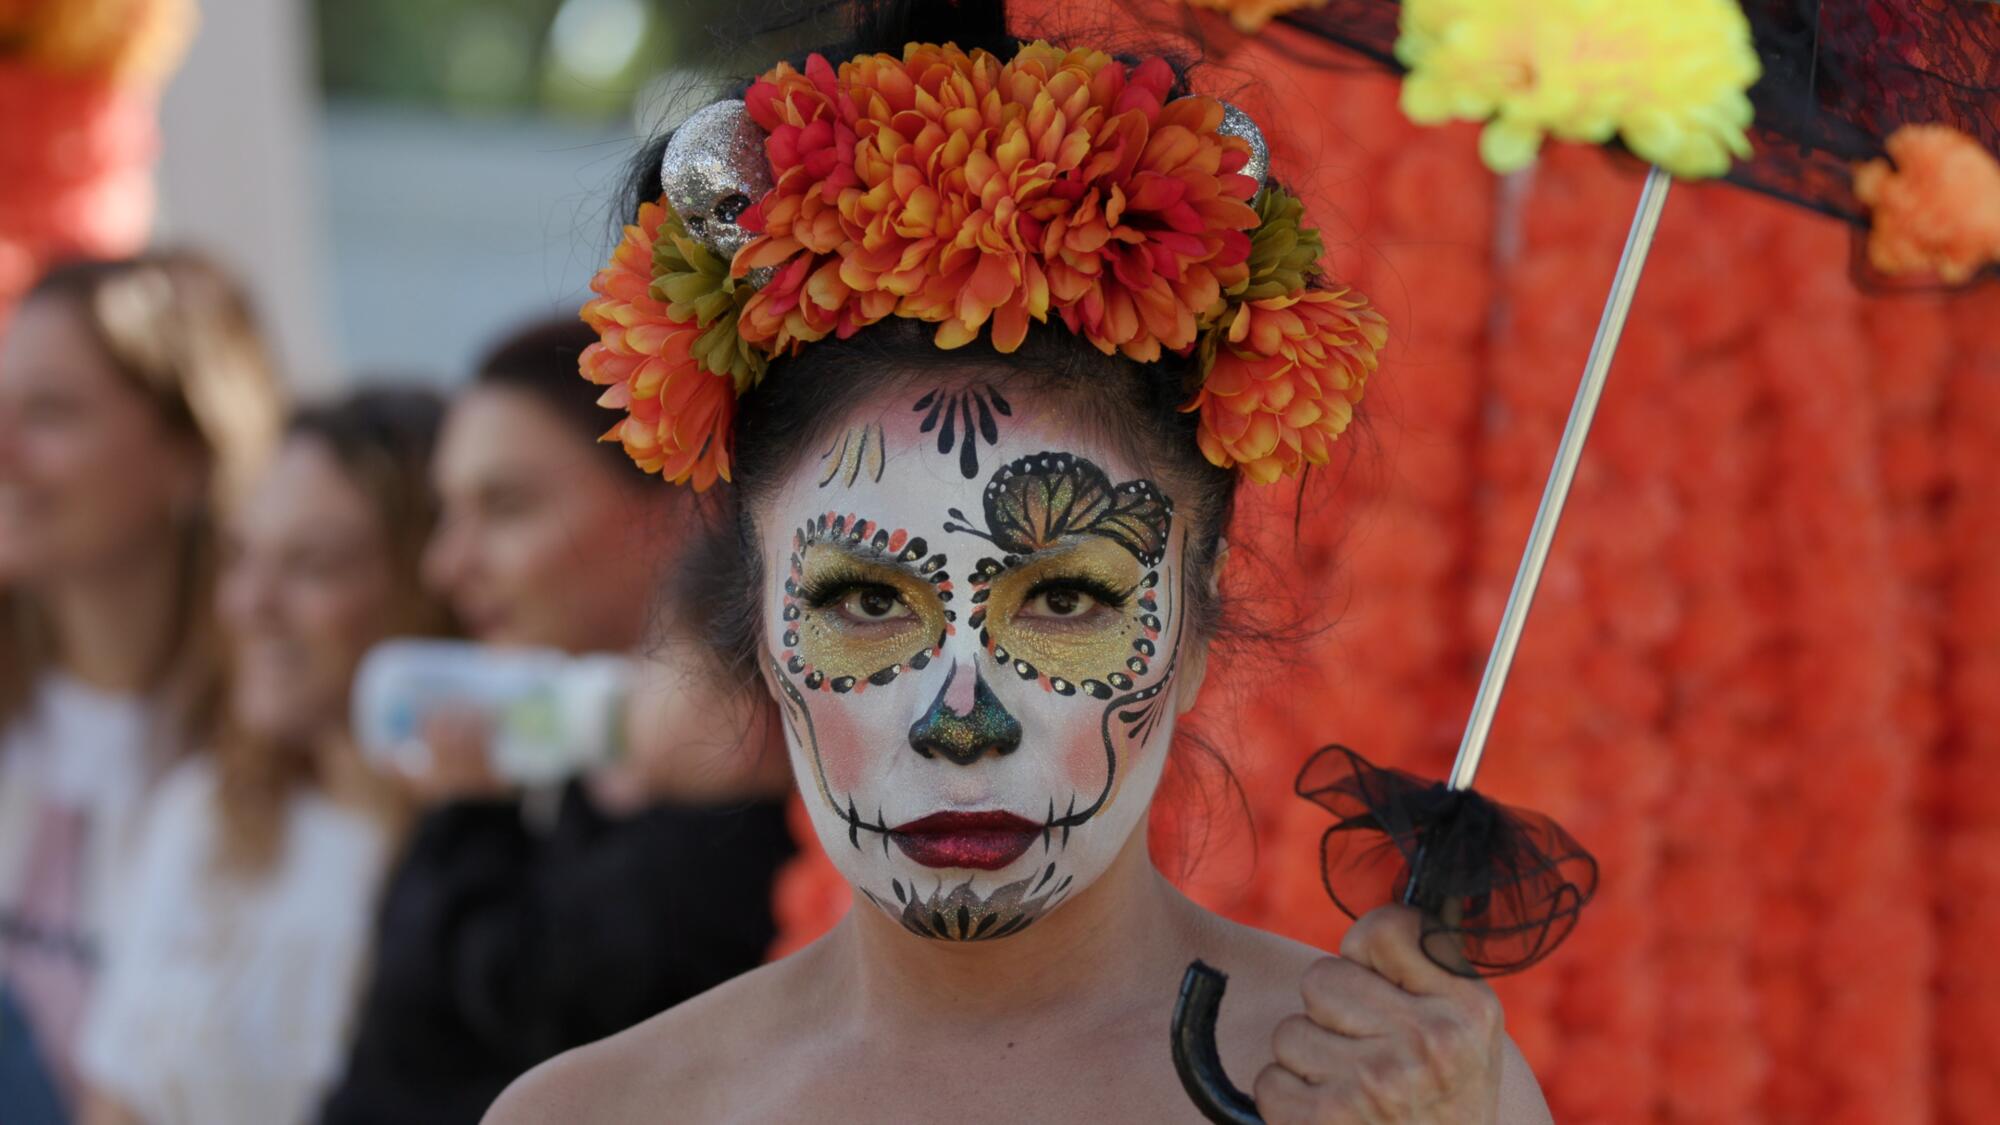 A woman attends a Dia de los Muertos event at Hollywood Forever cemetery.